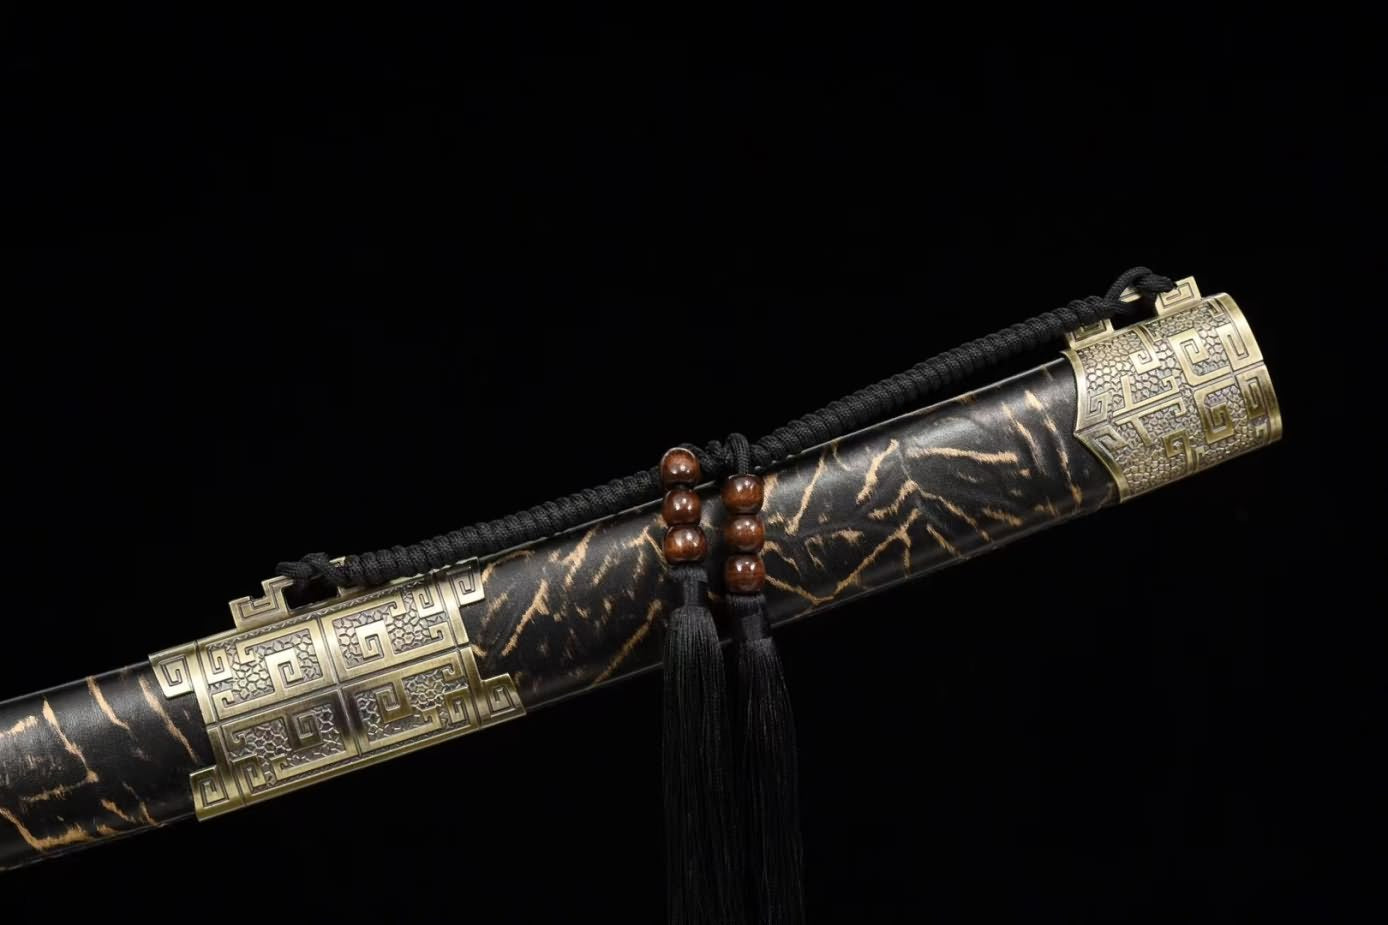 chinese sword,Black Gold dao Tactical Swords High Carbon Steel Black Blades,Alloy Fittings,LOONGSWORD